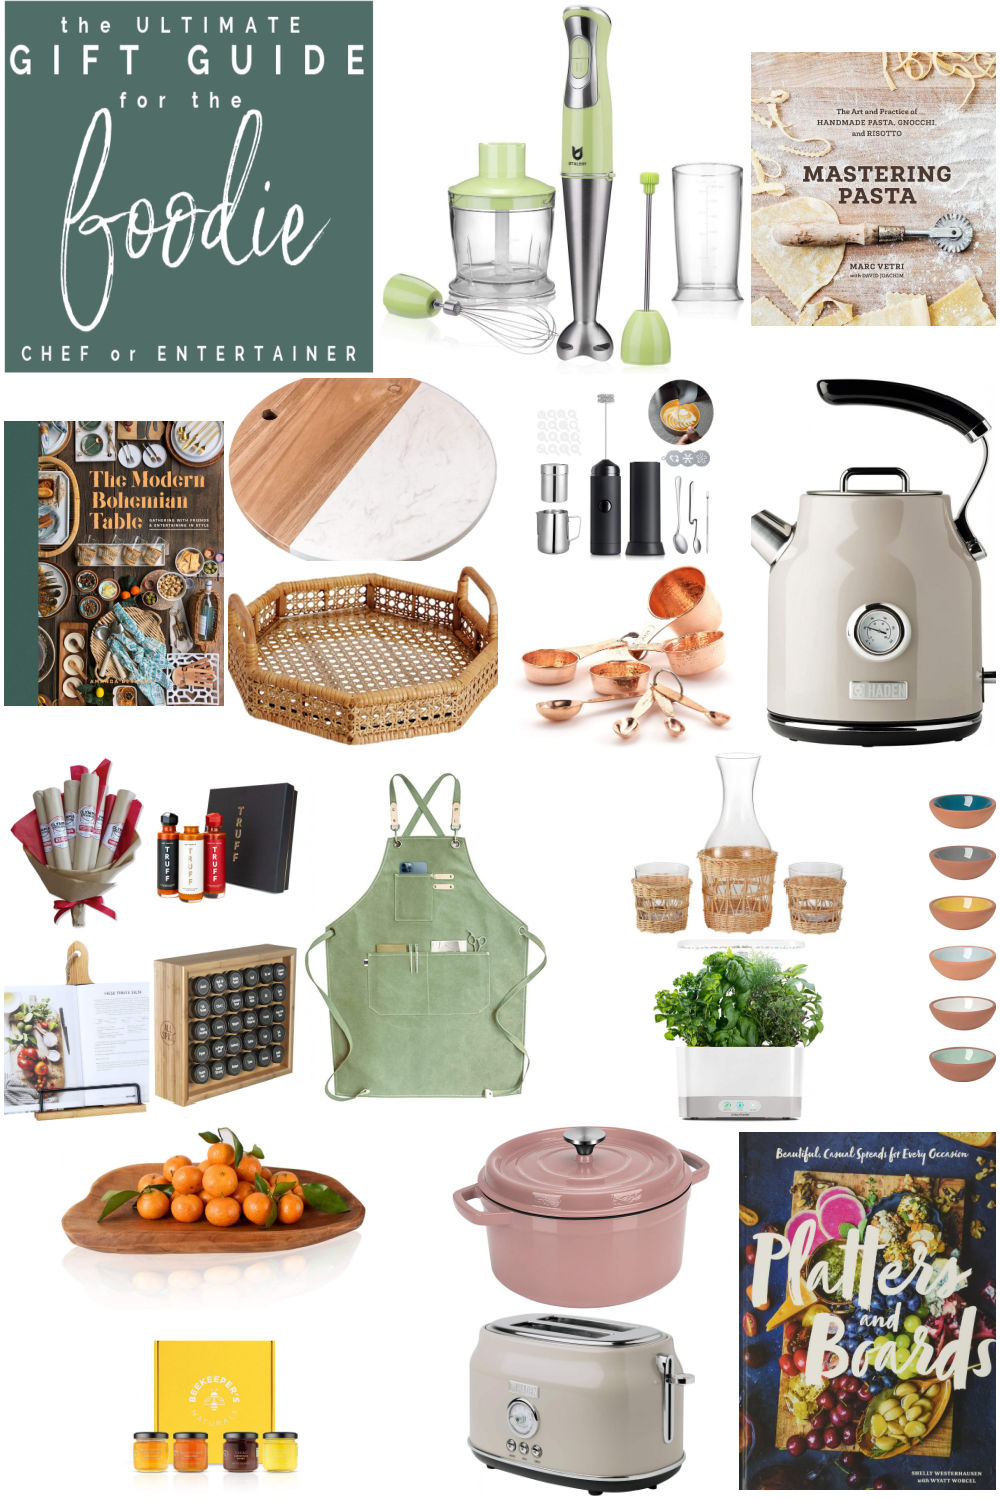 The Ultimate Gift Guide for the Foodie! 29 ideas that the foodie, chef and entertainer in your life will love for the kitchen!